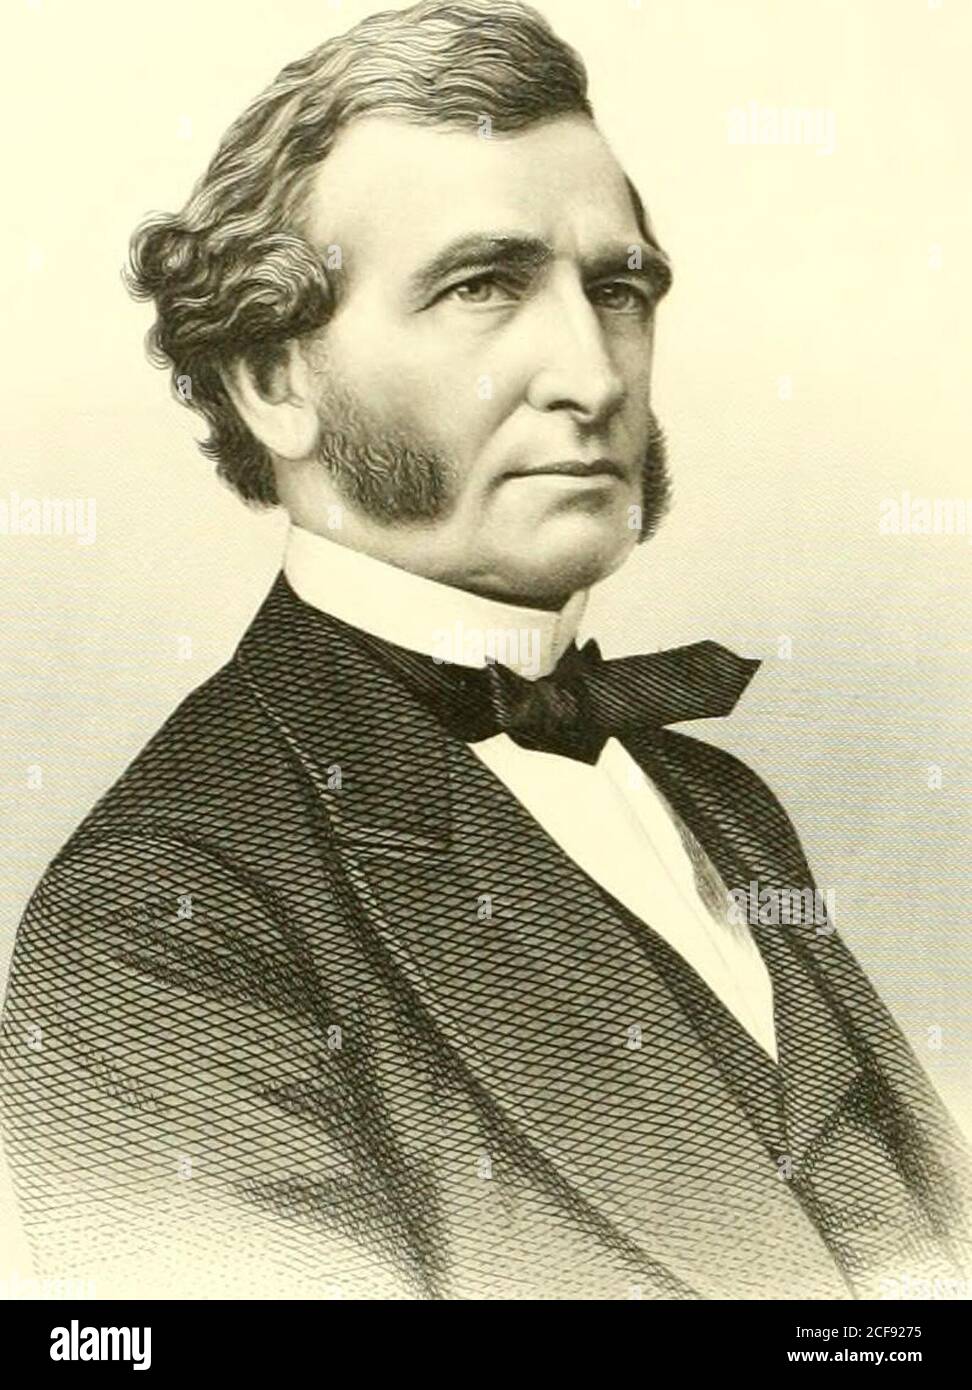 . The Fortieth Congress of the United States: historical and biographical. a member of the Committees on Public Lands, Public Buildings, Appropriations, and the Special Joint Committee on the Eebellious States. In 1865 he received from Iowa College the degree of LL. D. In the Impeachment trial he incurred severe censure from many of his political friends by voting for the acquittal of the President. In his opinion of the case, he said, I cannot sufler my judgment of the law governing this case to be influenced by political considerations, I cannot agree to destroy the harmonious working of the Stock Photo